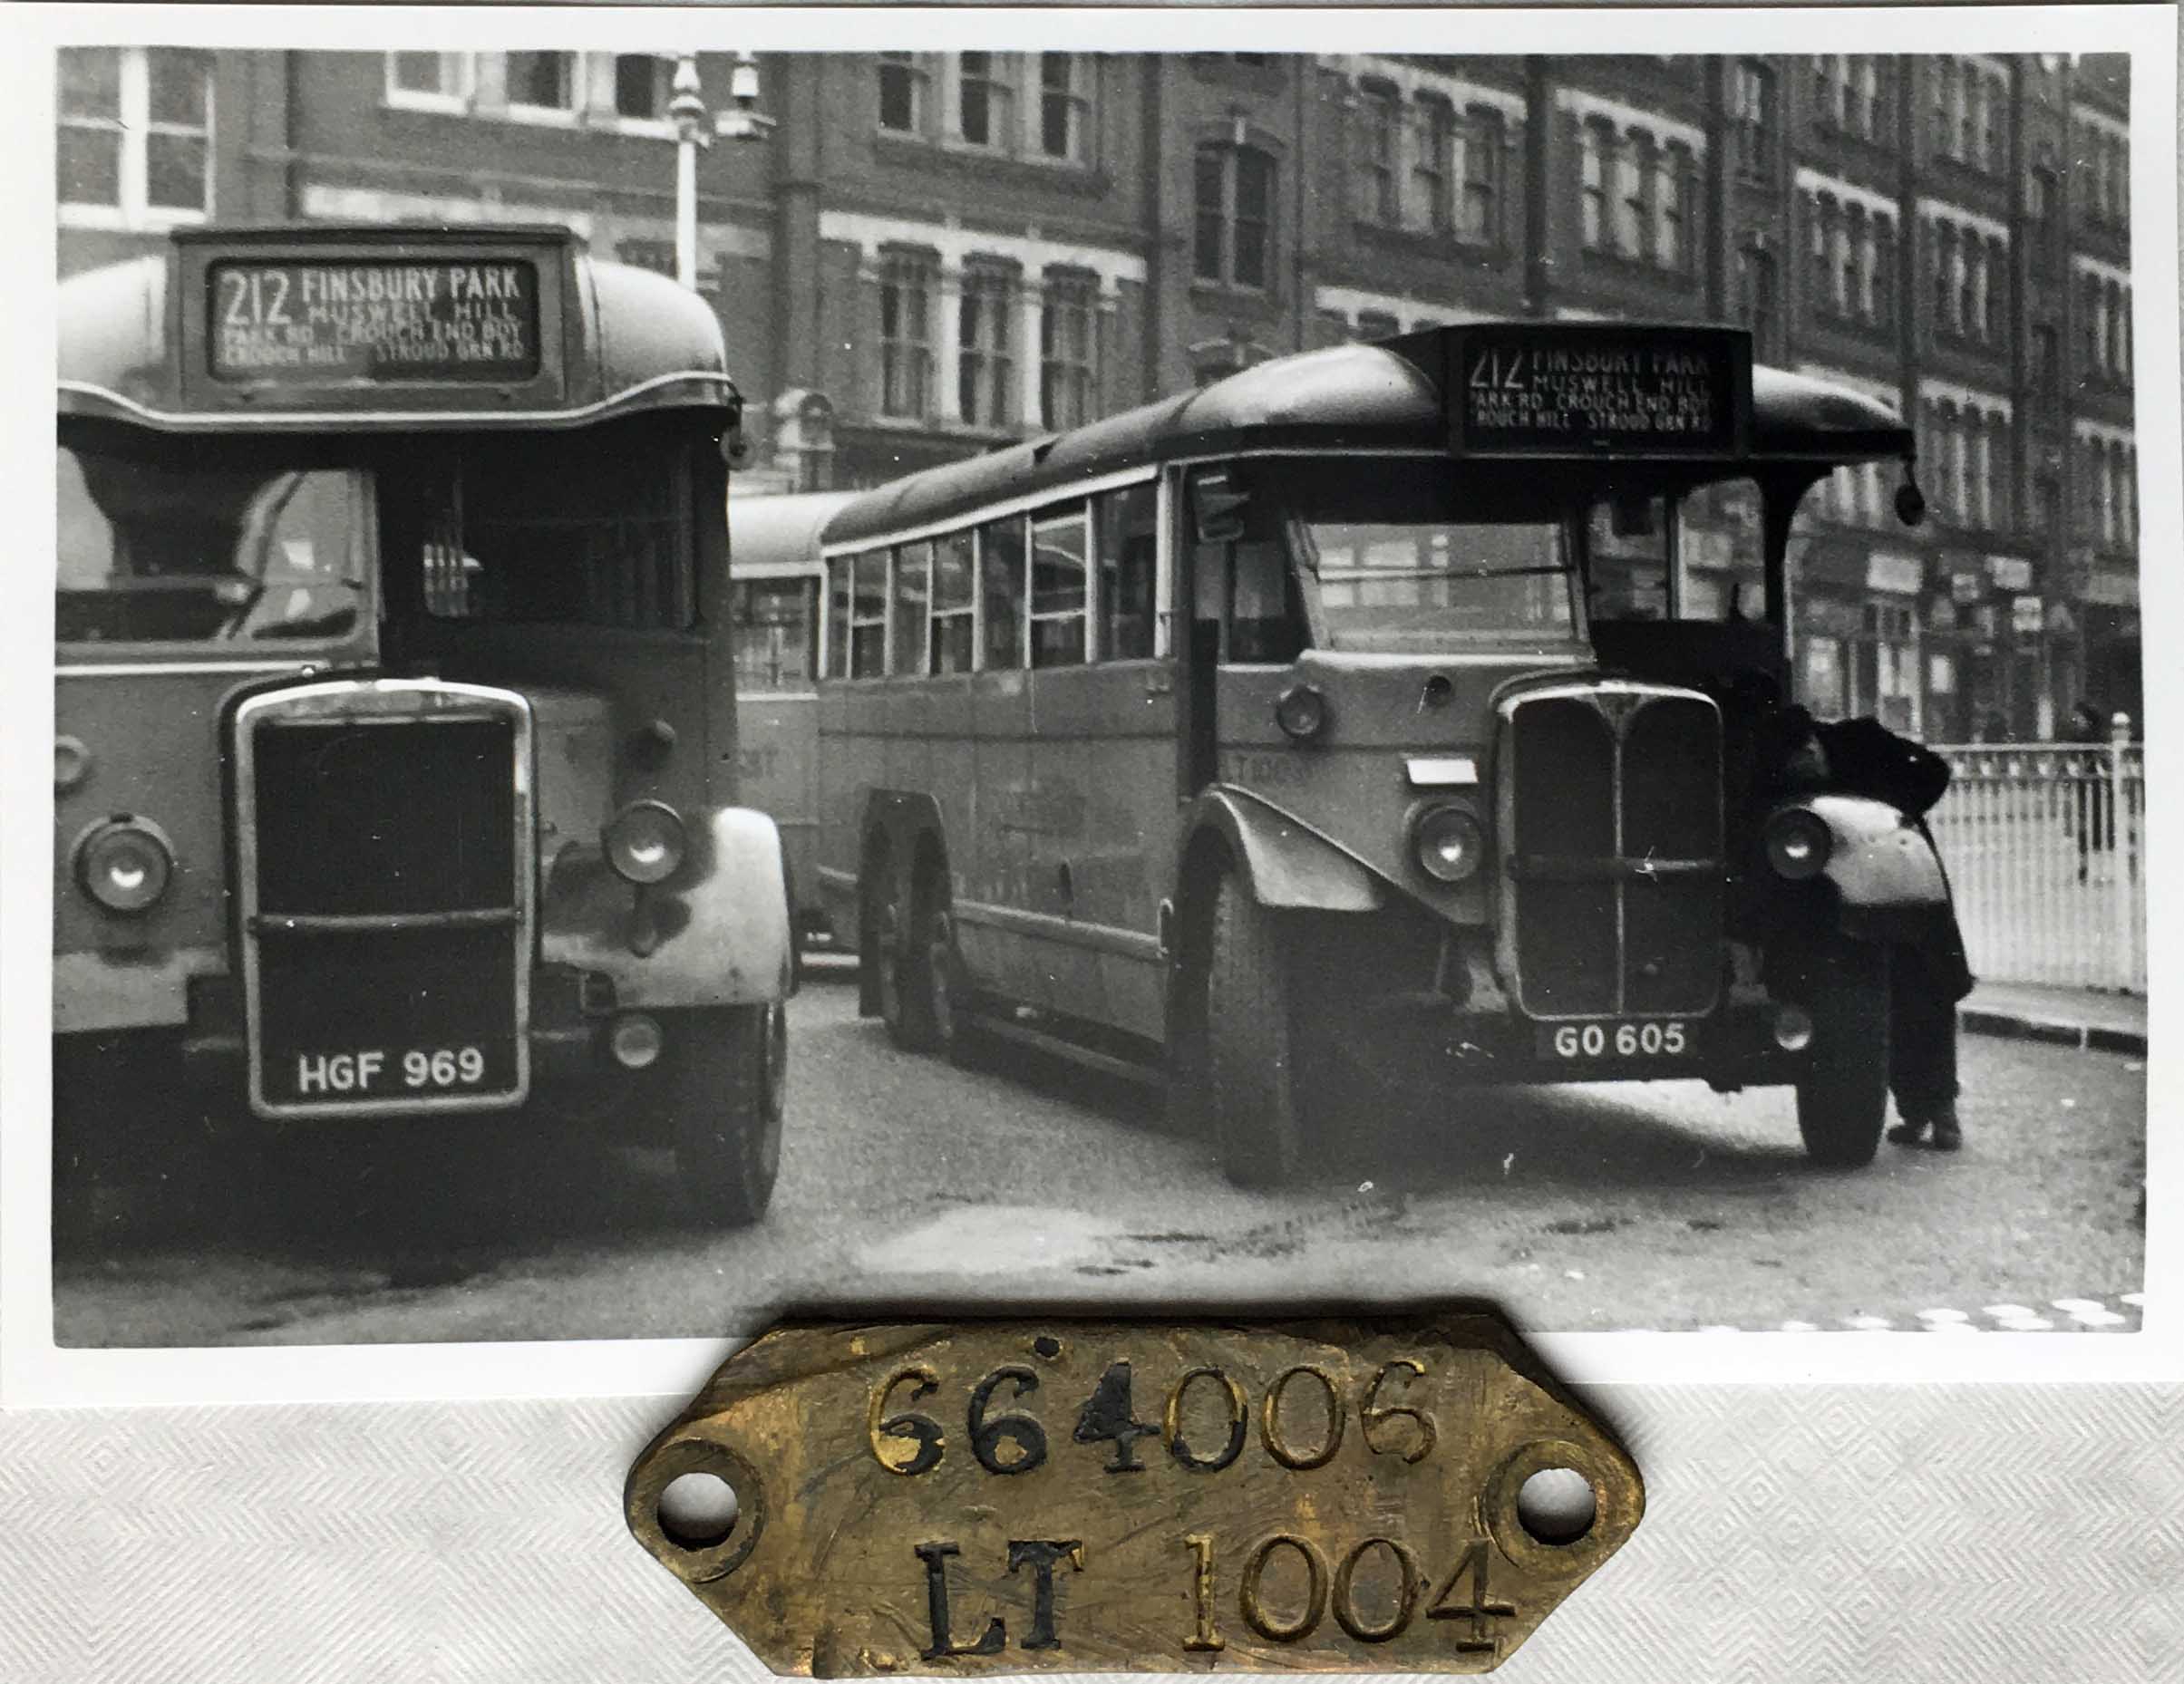 London Transport brass CHASSIS TAG, aka a DUMB-IRON PLATE, for single-deck bus LT 1004 accompanied